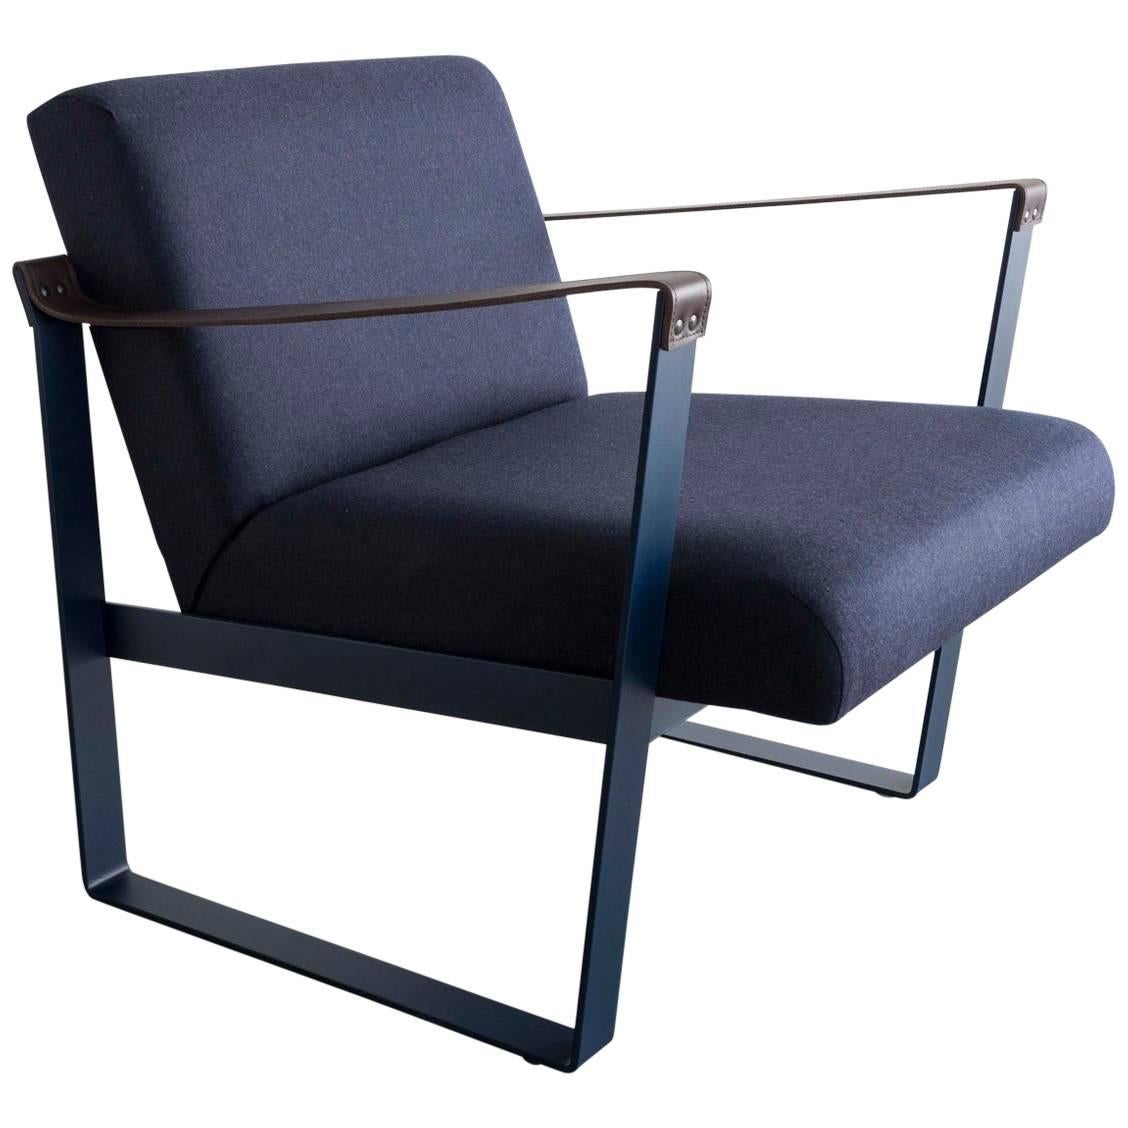 Strap Lounge Chair, Blue Powder Coated Steel, Leather, Navy Cotton Upholstery